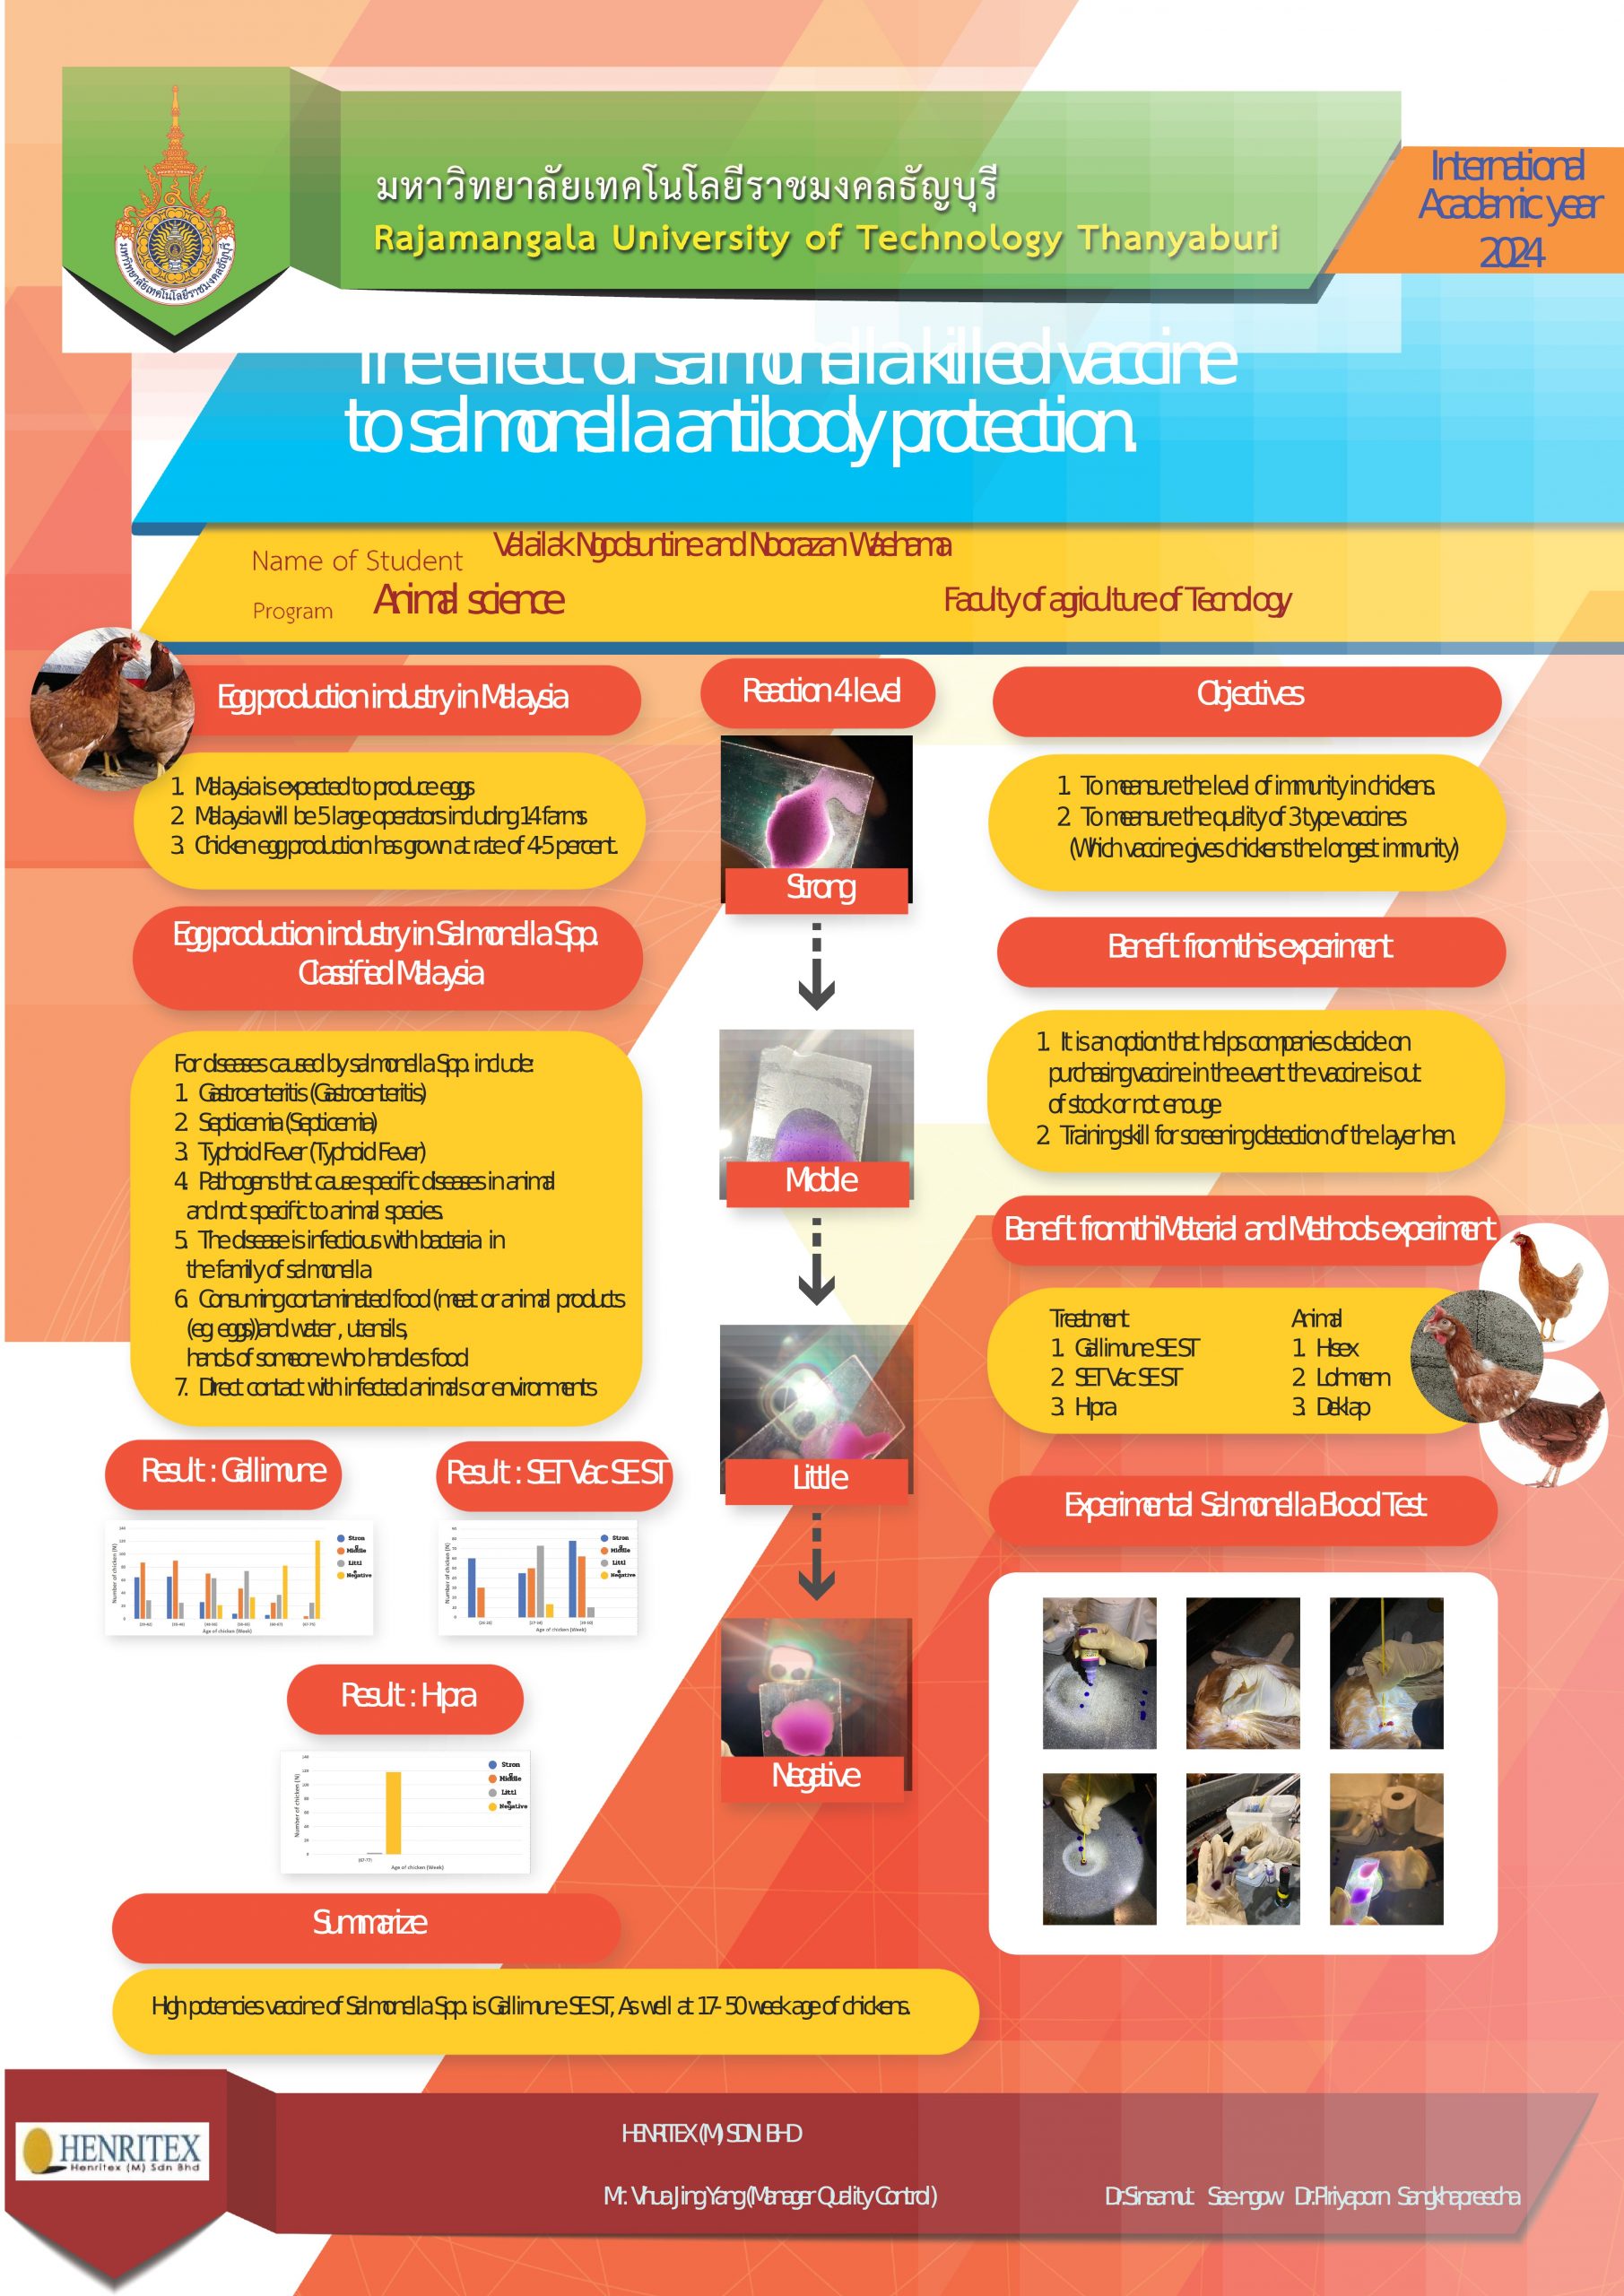 3.The-effect-of-salmonella-killed-vaccine-1 ชมเชย 2